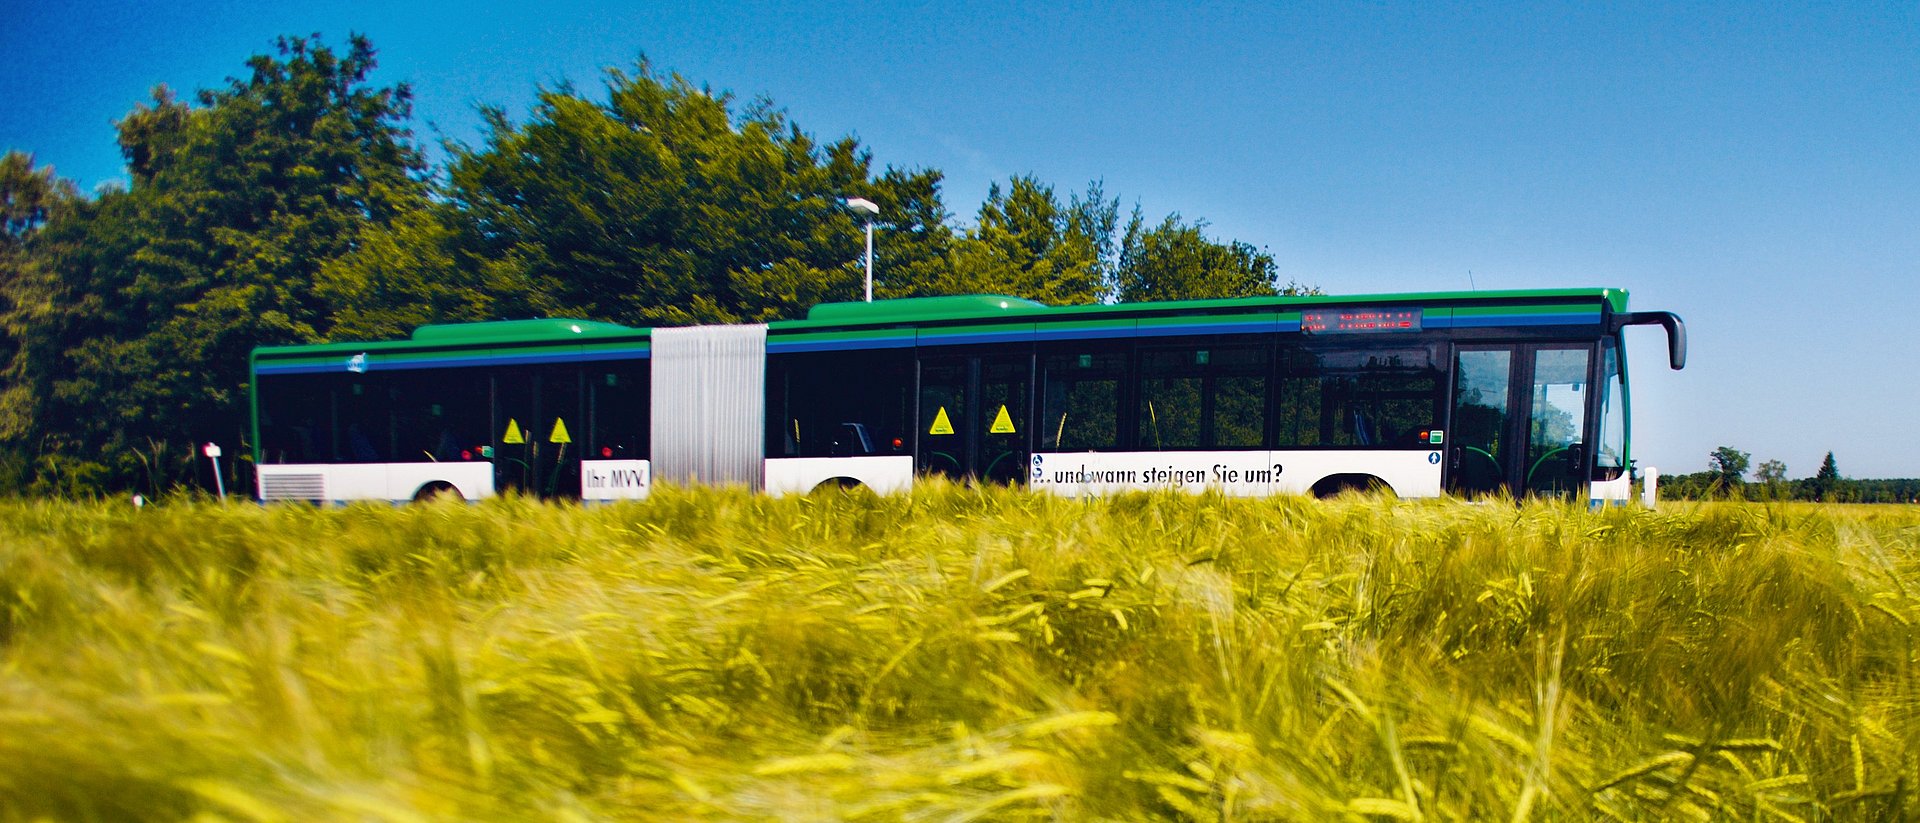 The express bus line X660 connects the Garching research campus directly with the TUM Freising campus. 